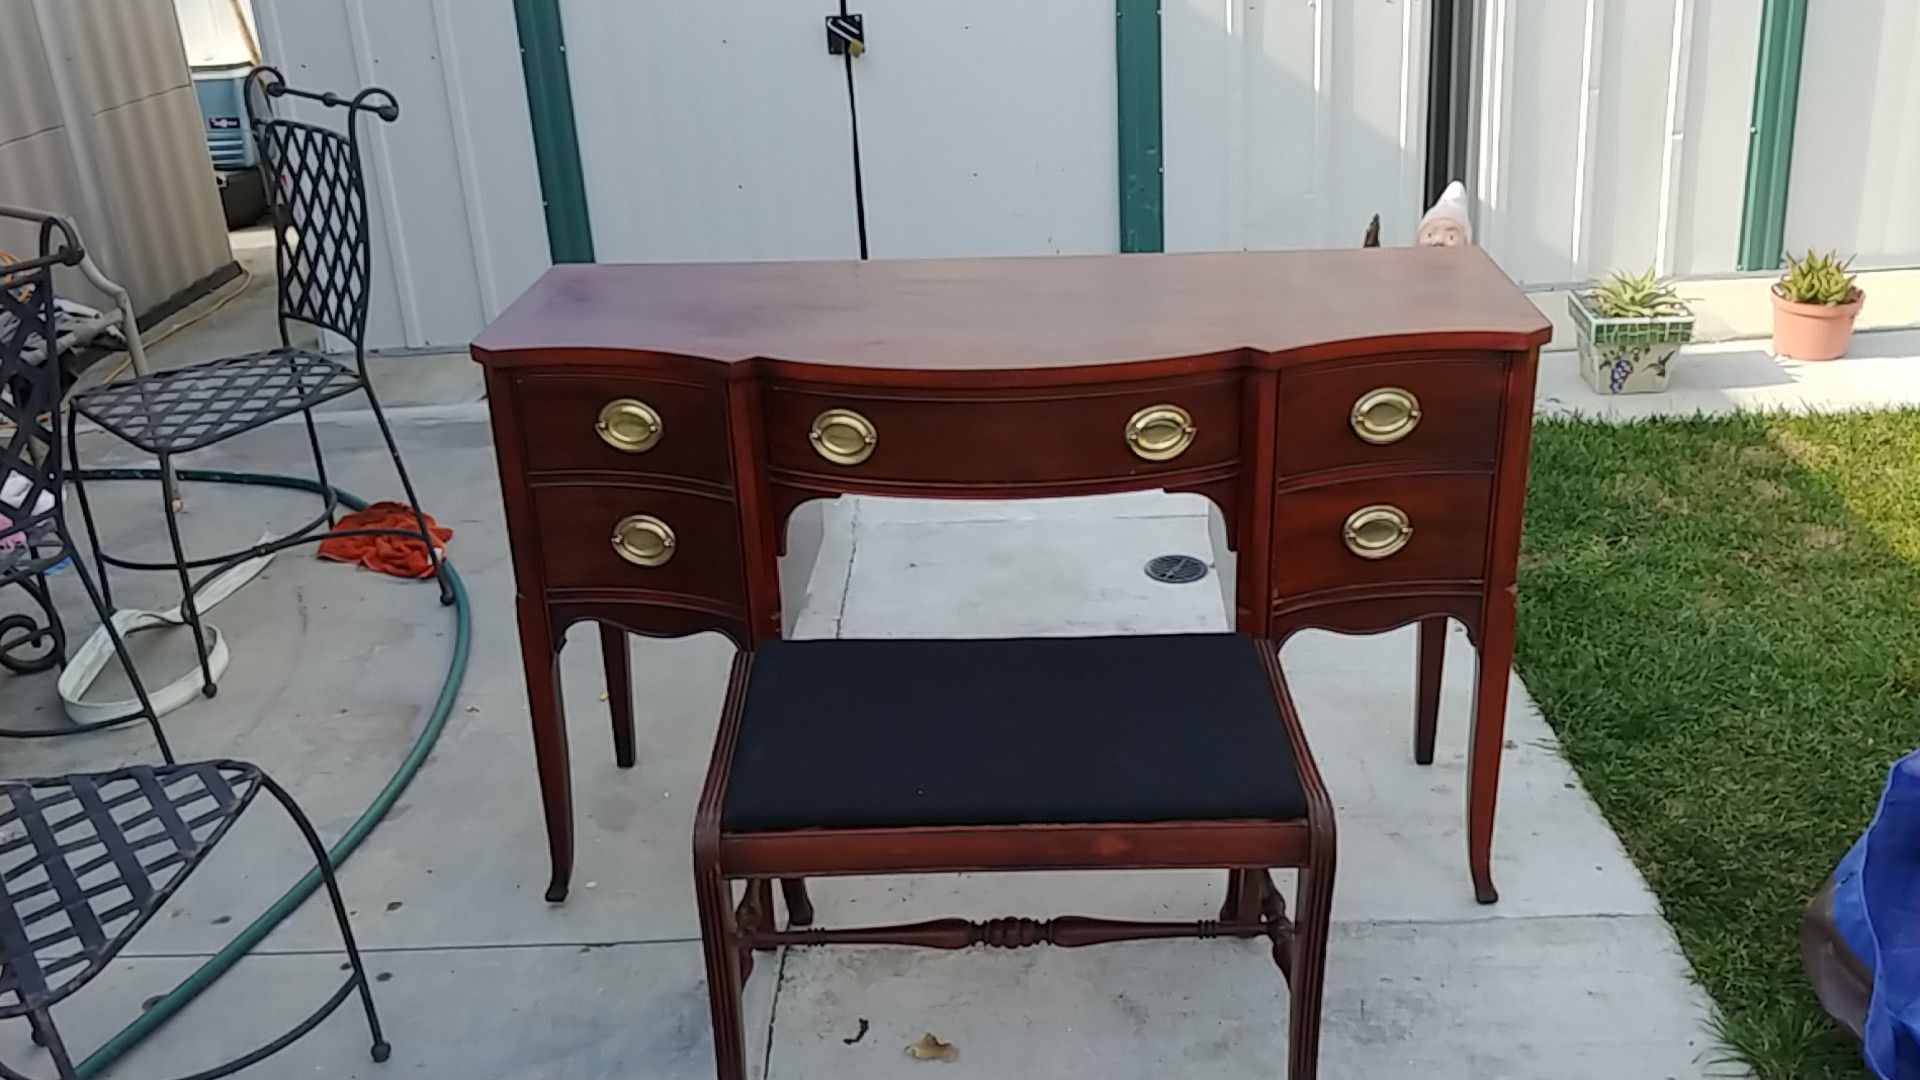 Antique desk with a sitting stool 1930s